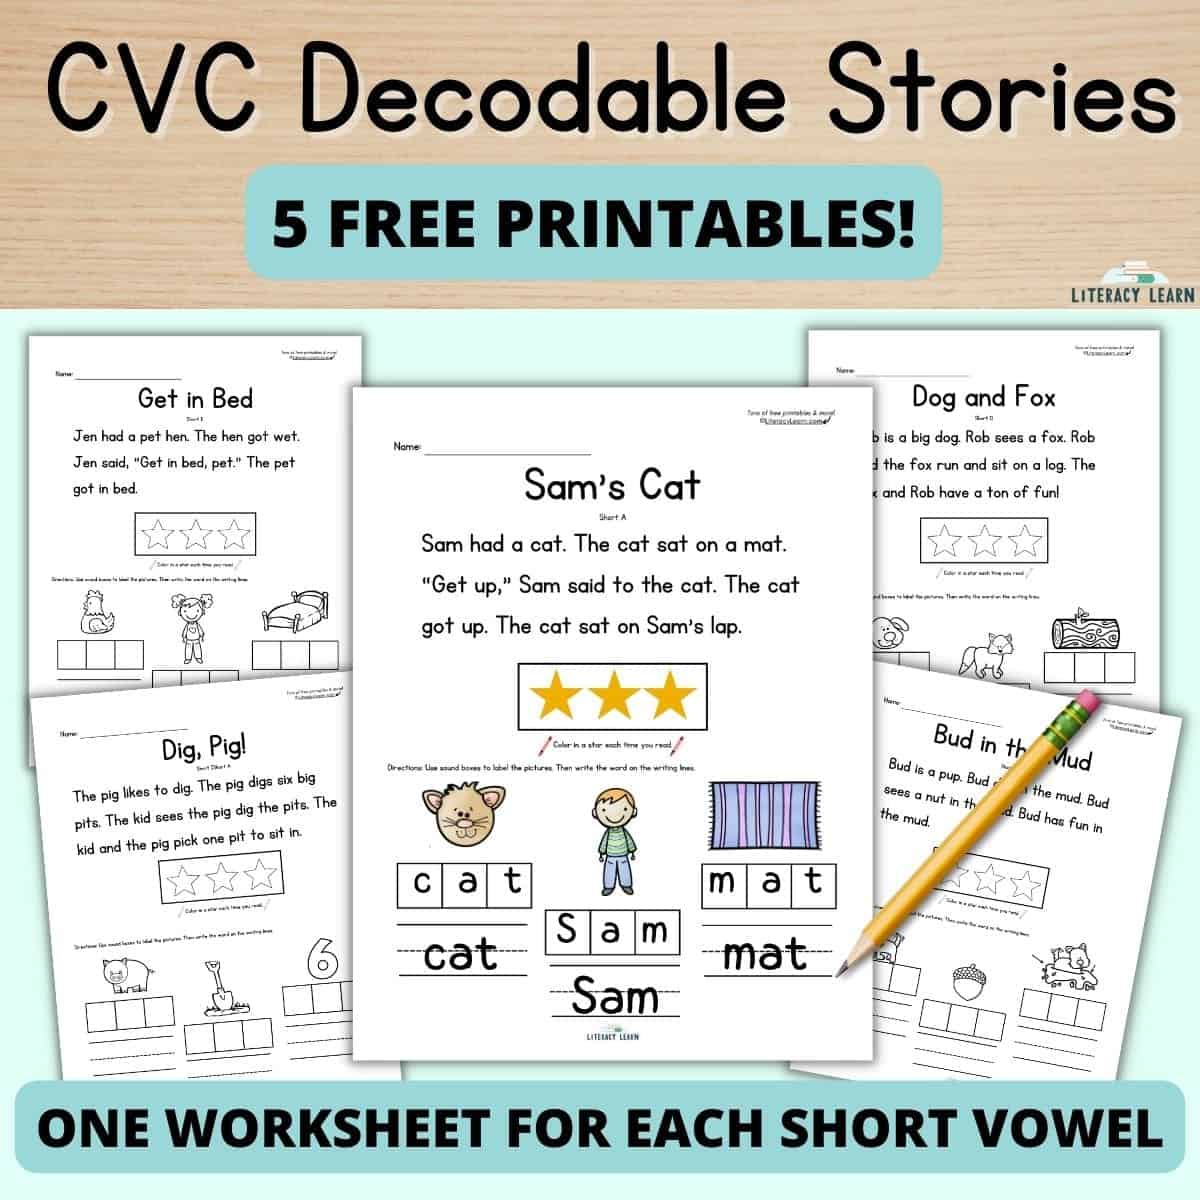 Colorful graphic showing 5 printable CVC word story worksheets.